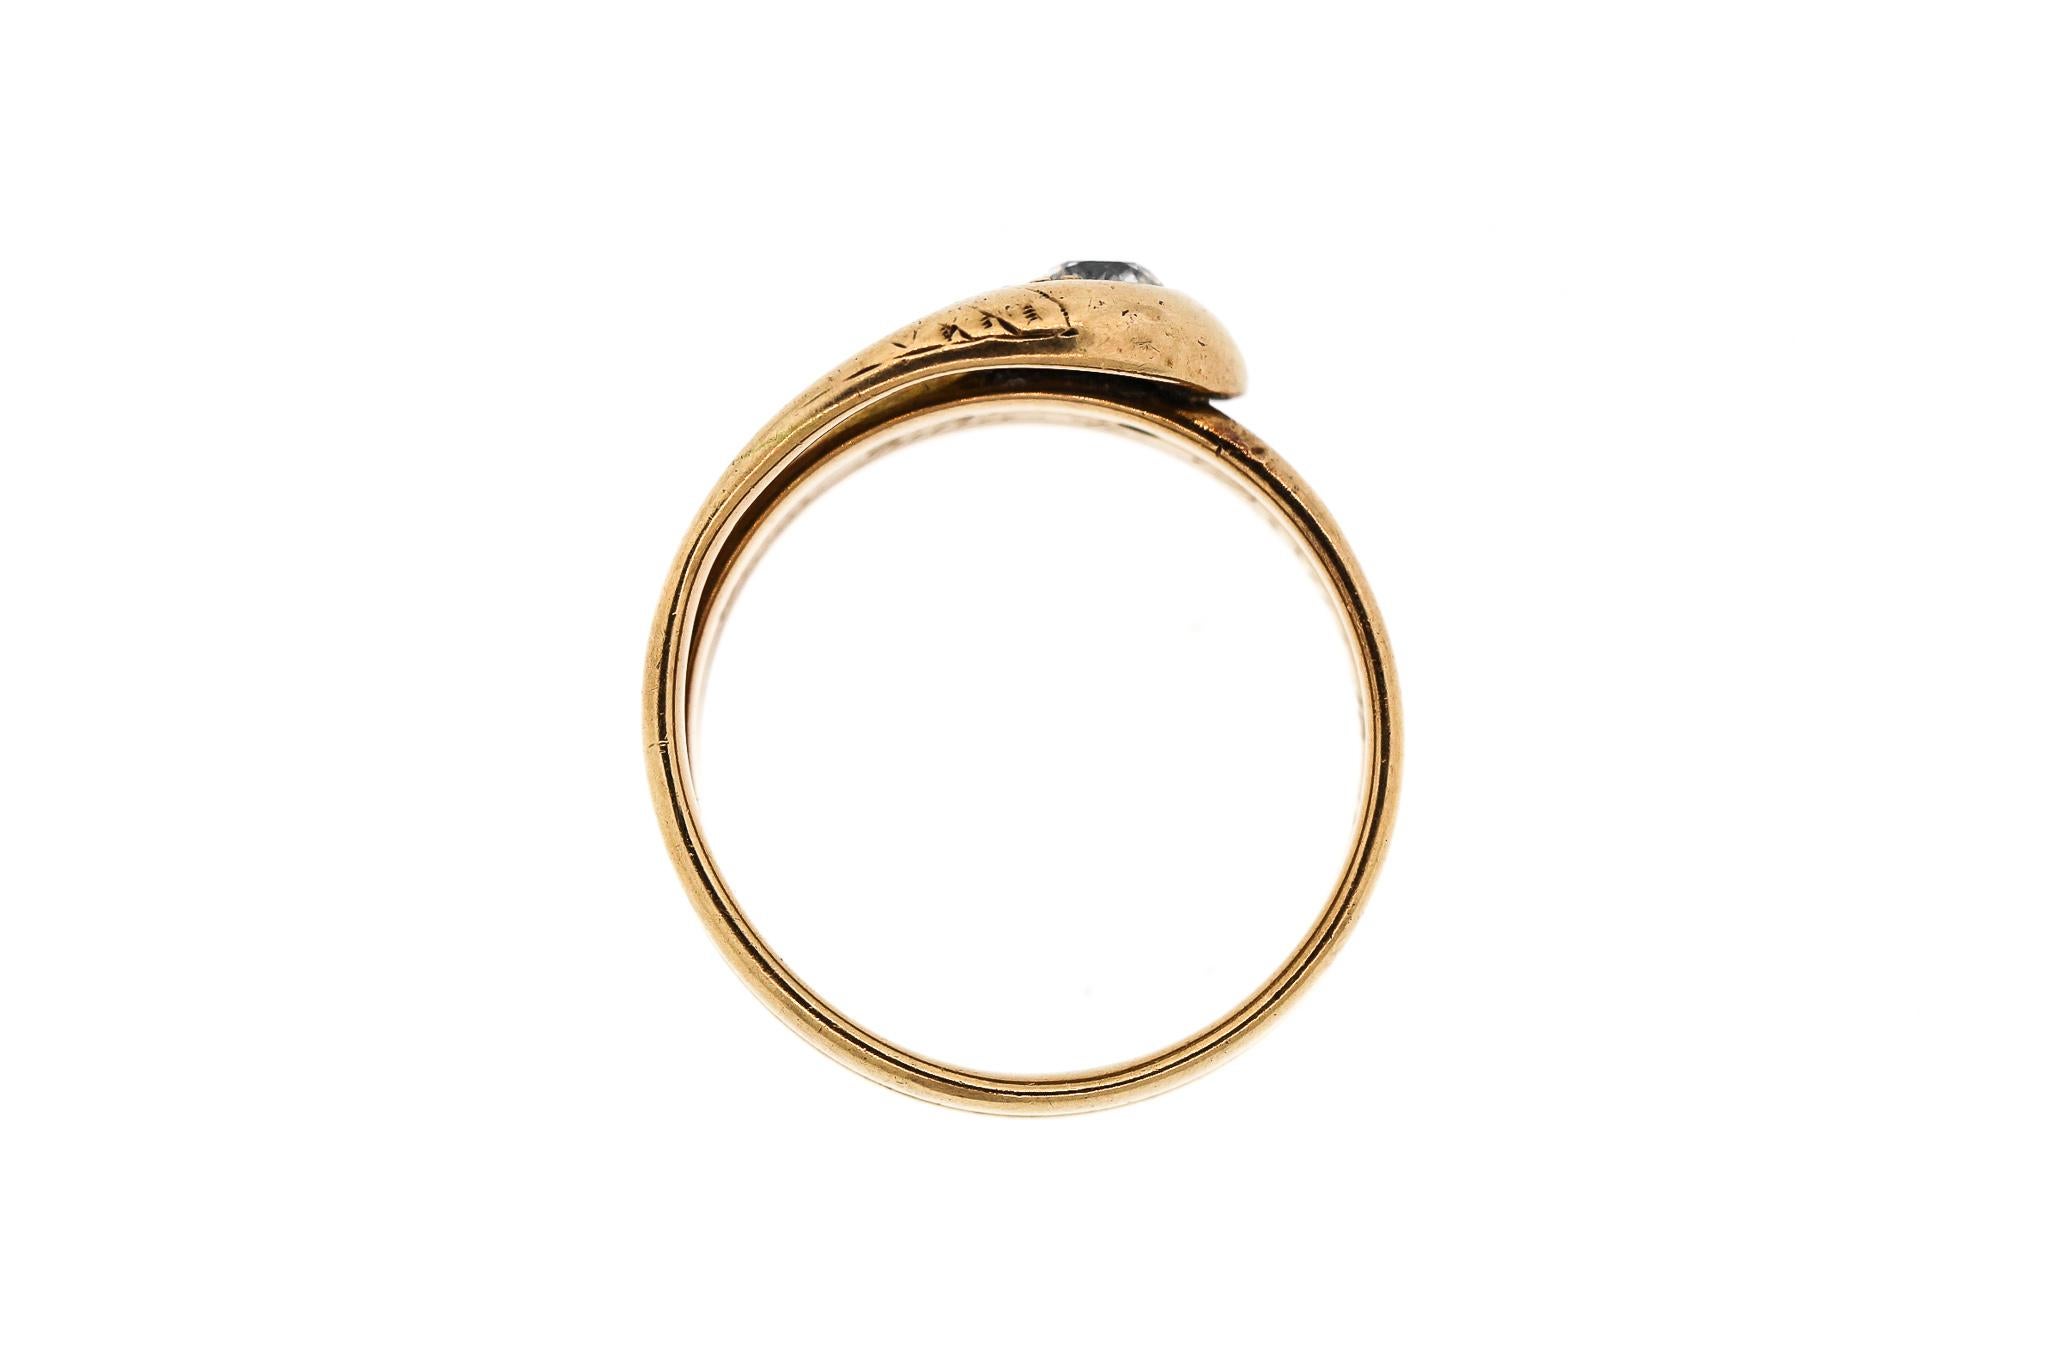 A coiled 14k yellow gold coiled snake ring set with an Old European cut diamond and two small single cut diamonds dating to about 1900. The ring bears an inscription 